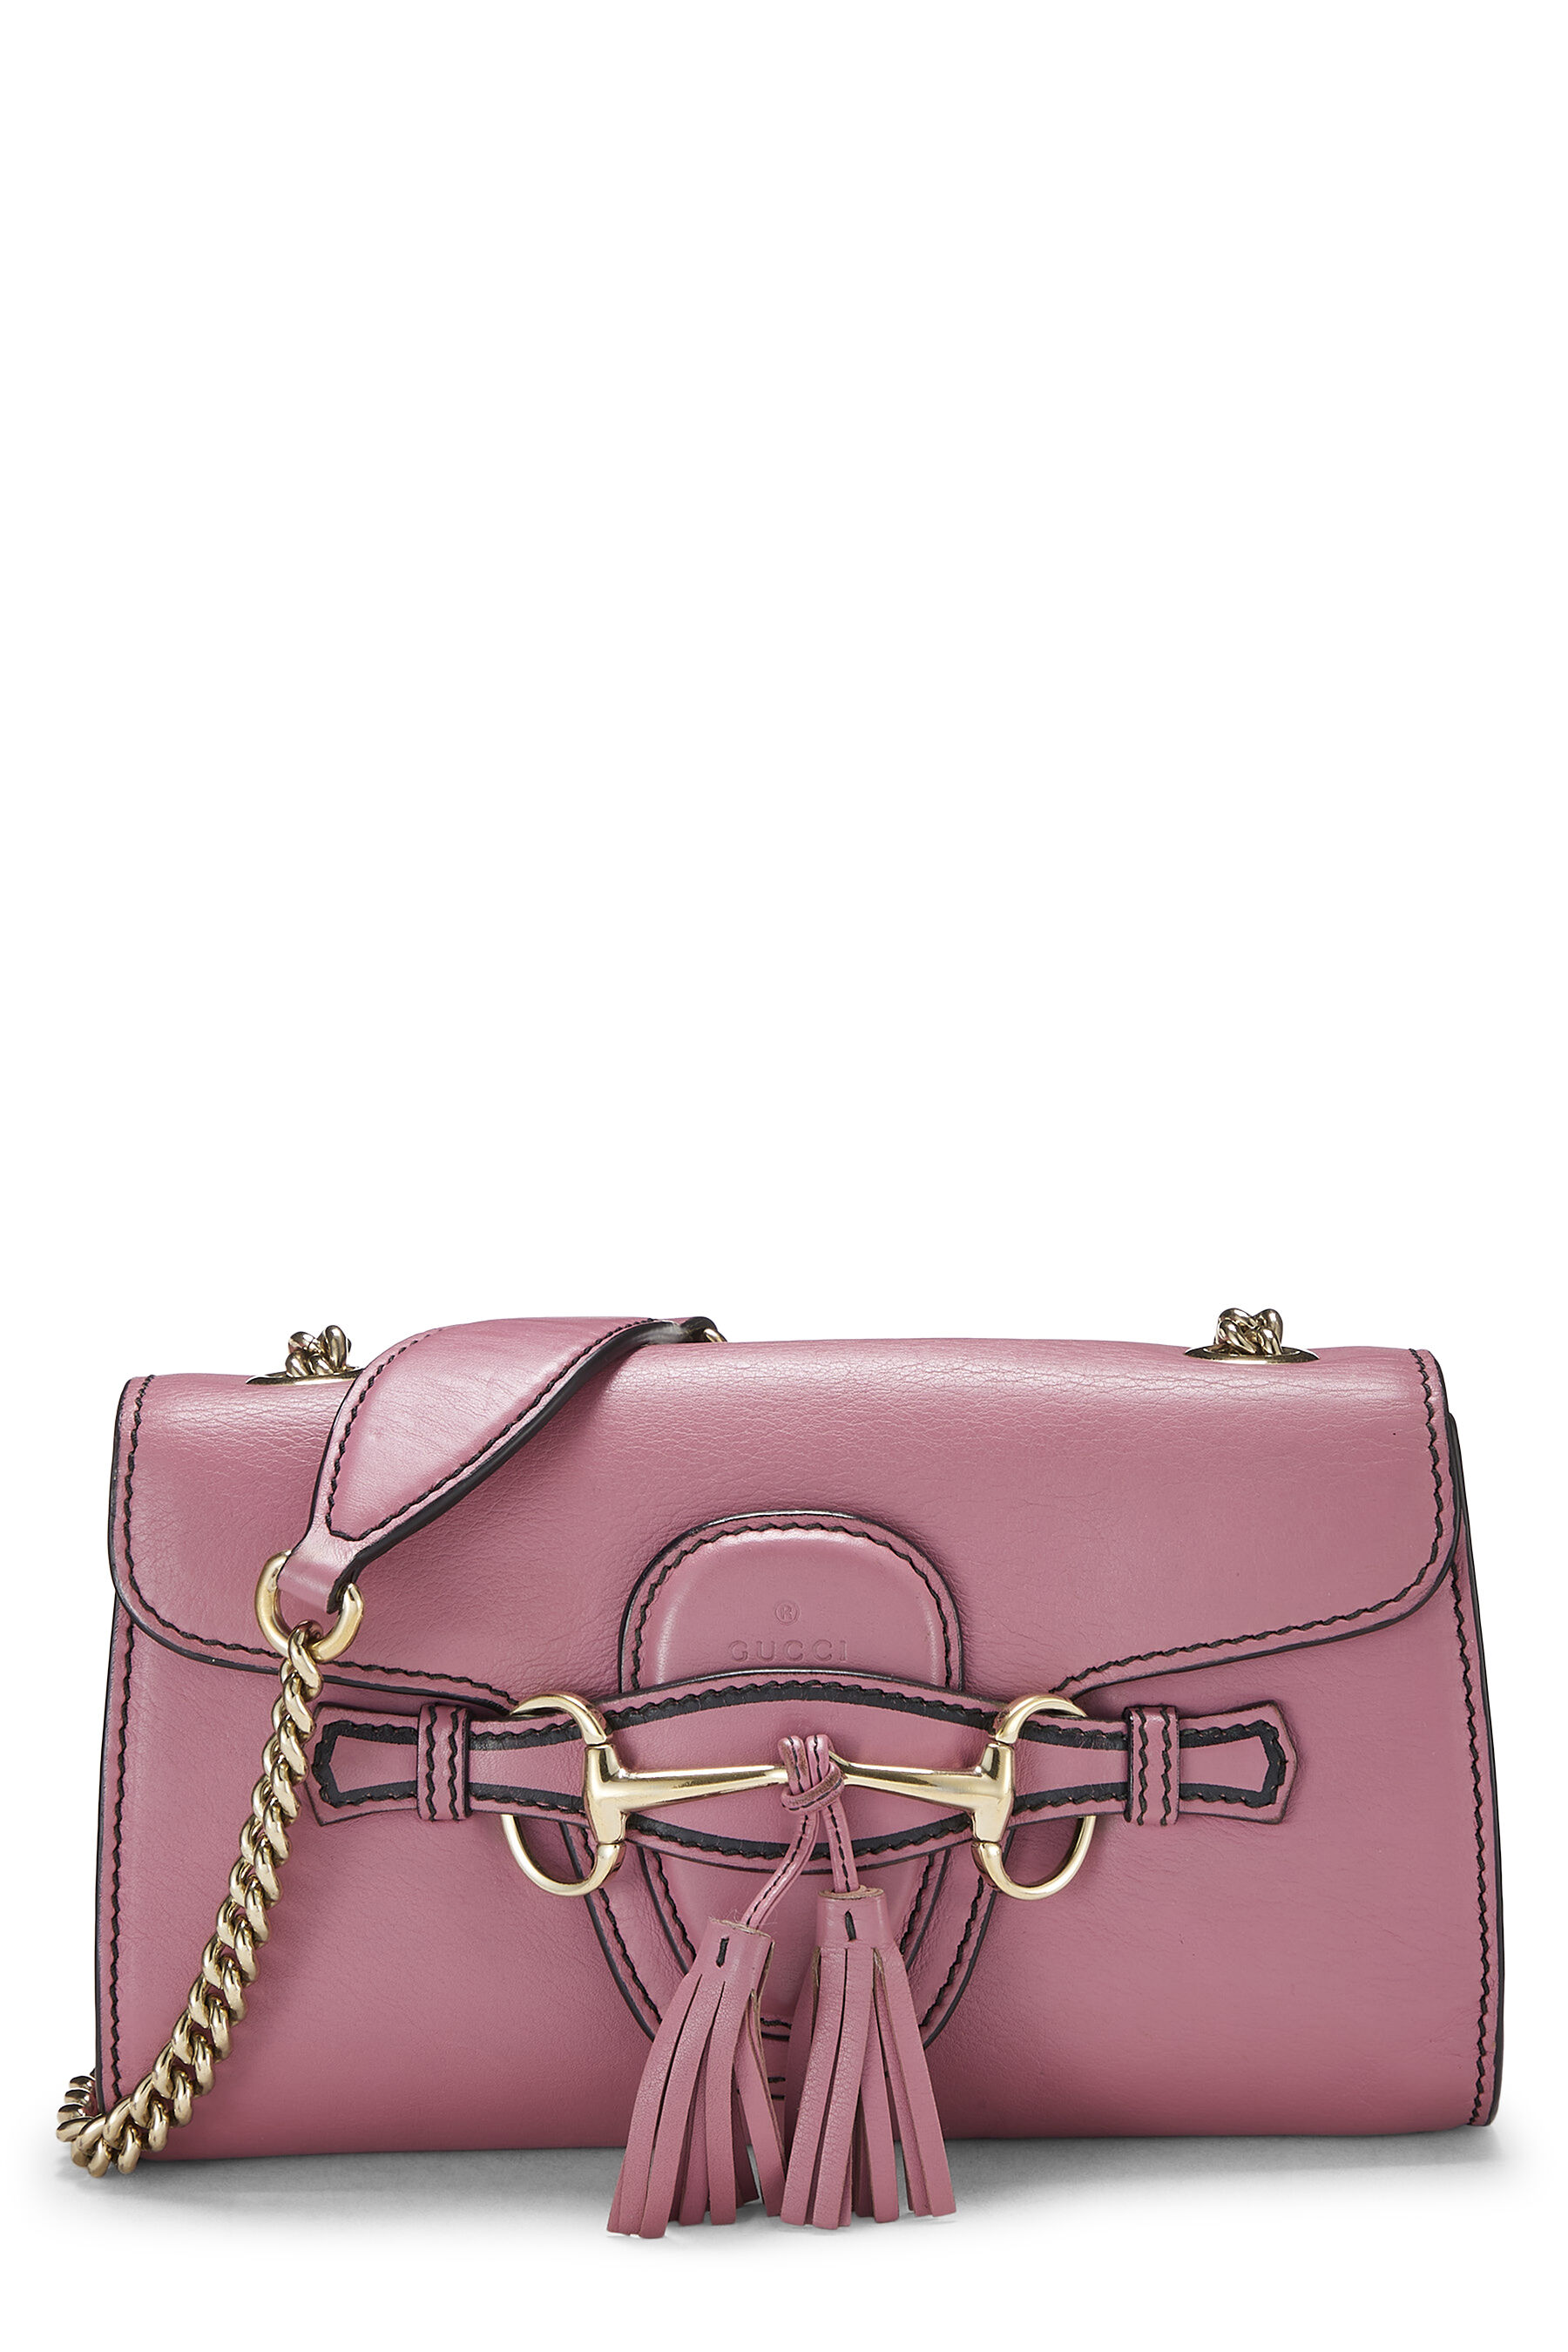 Gucci Pink Leather Emily Chain Shoulder Bag Small